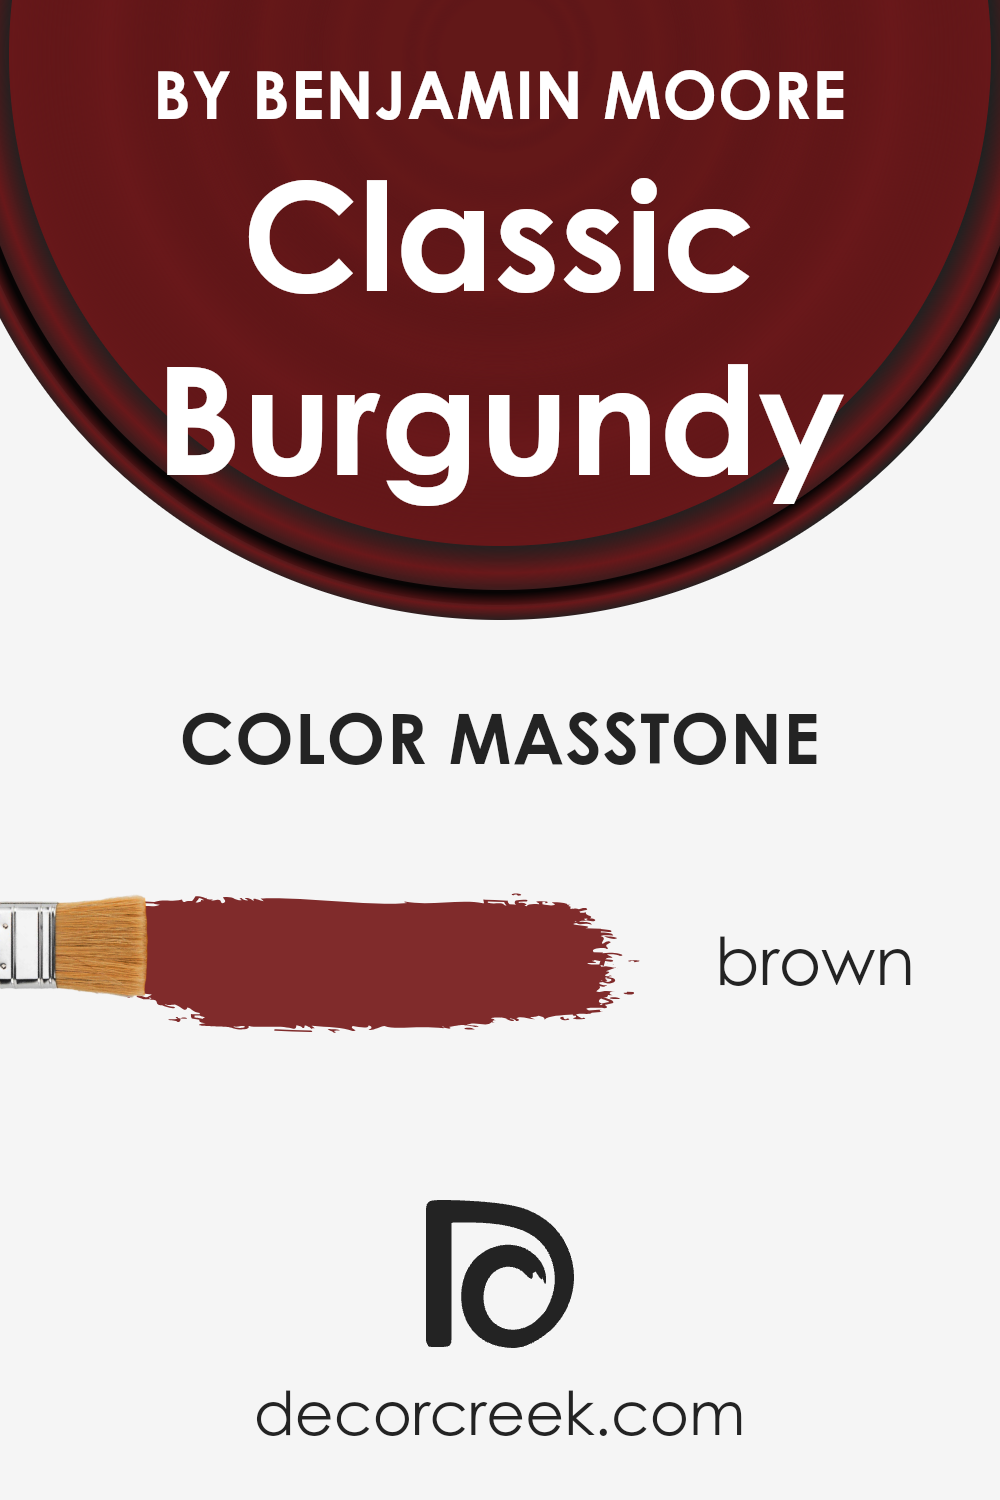 what_is_the_masstone_of_classic_burgundy_hc_182